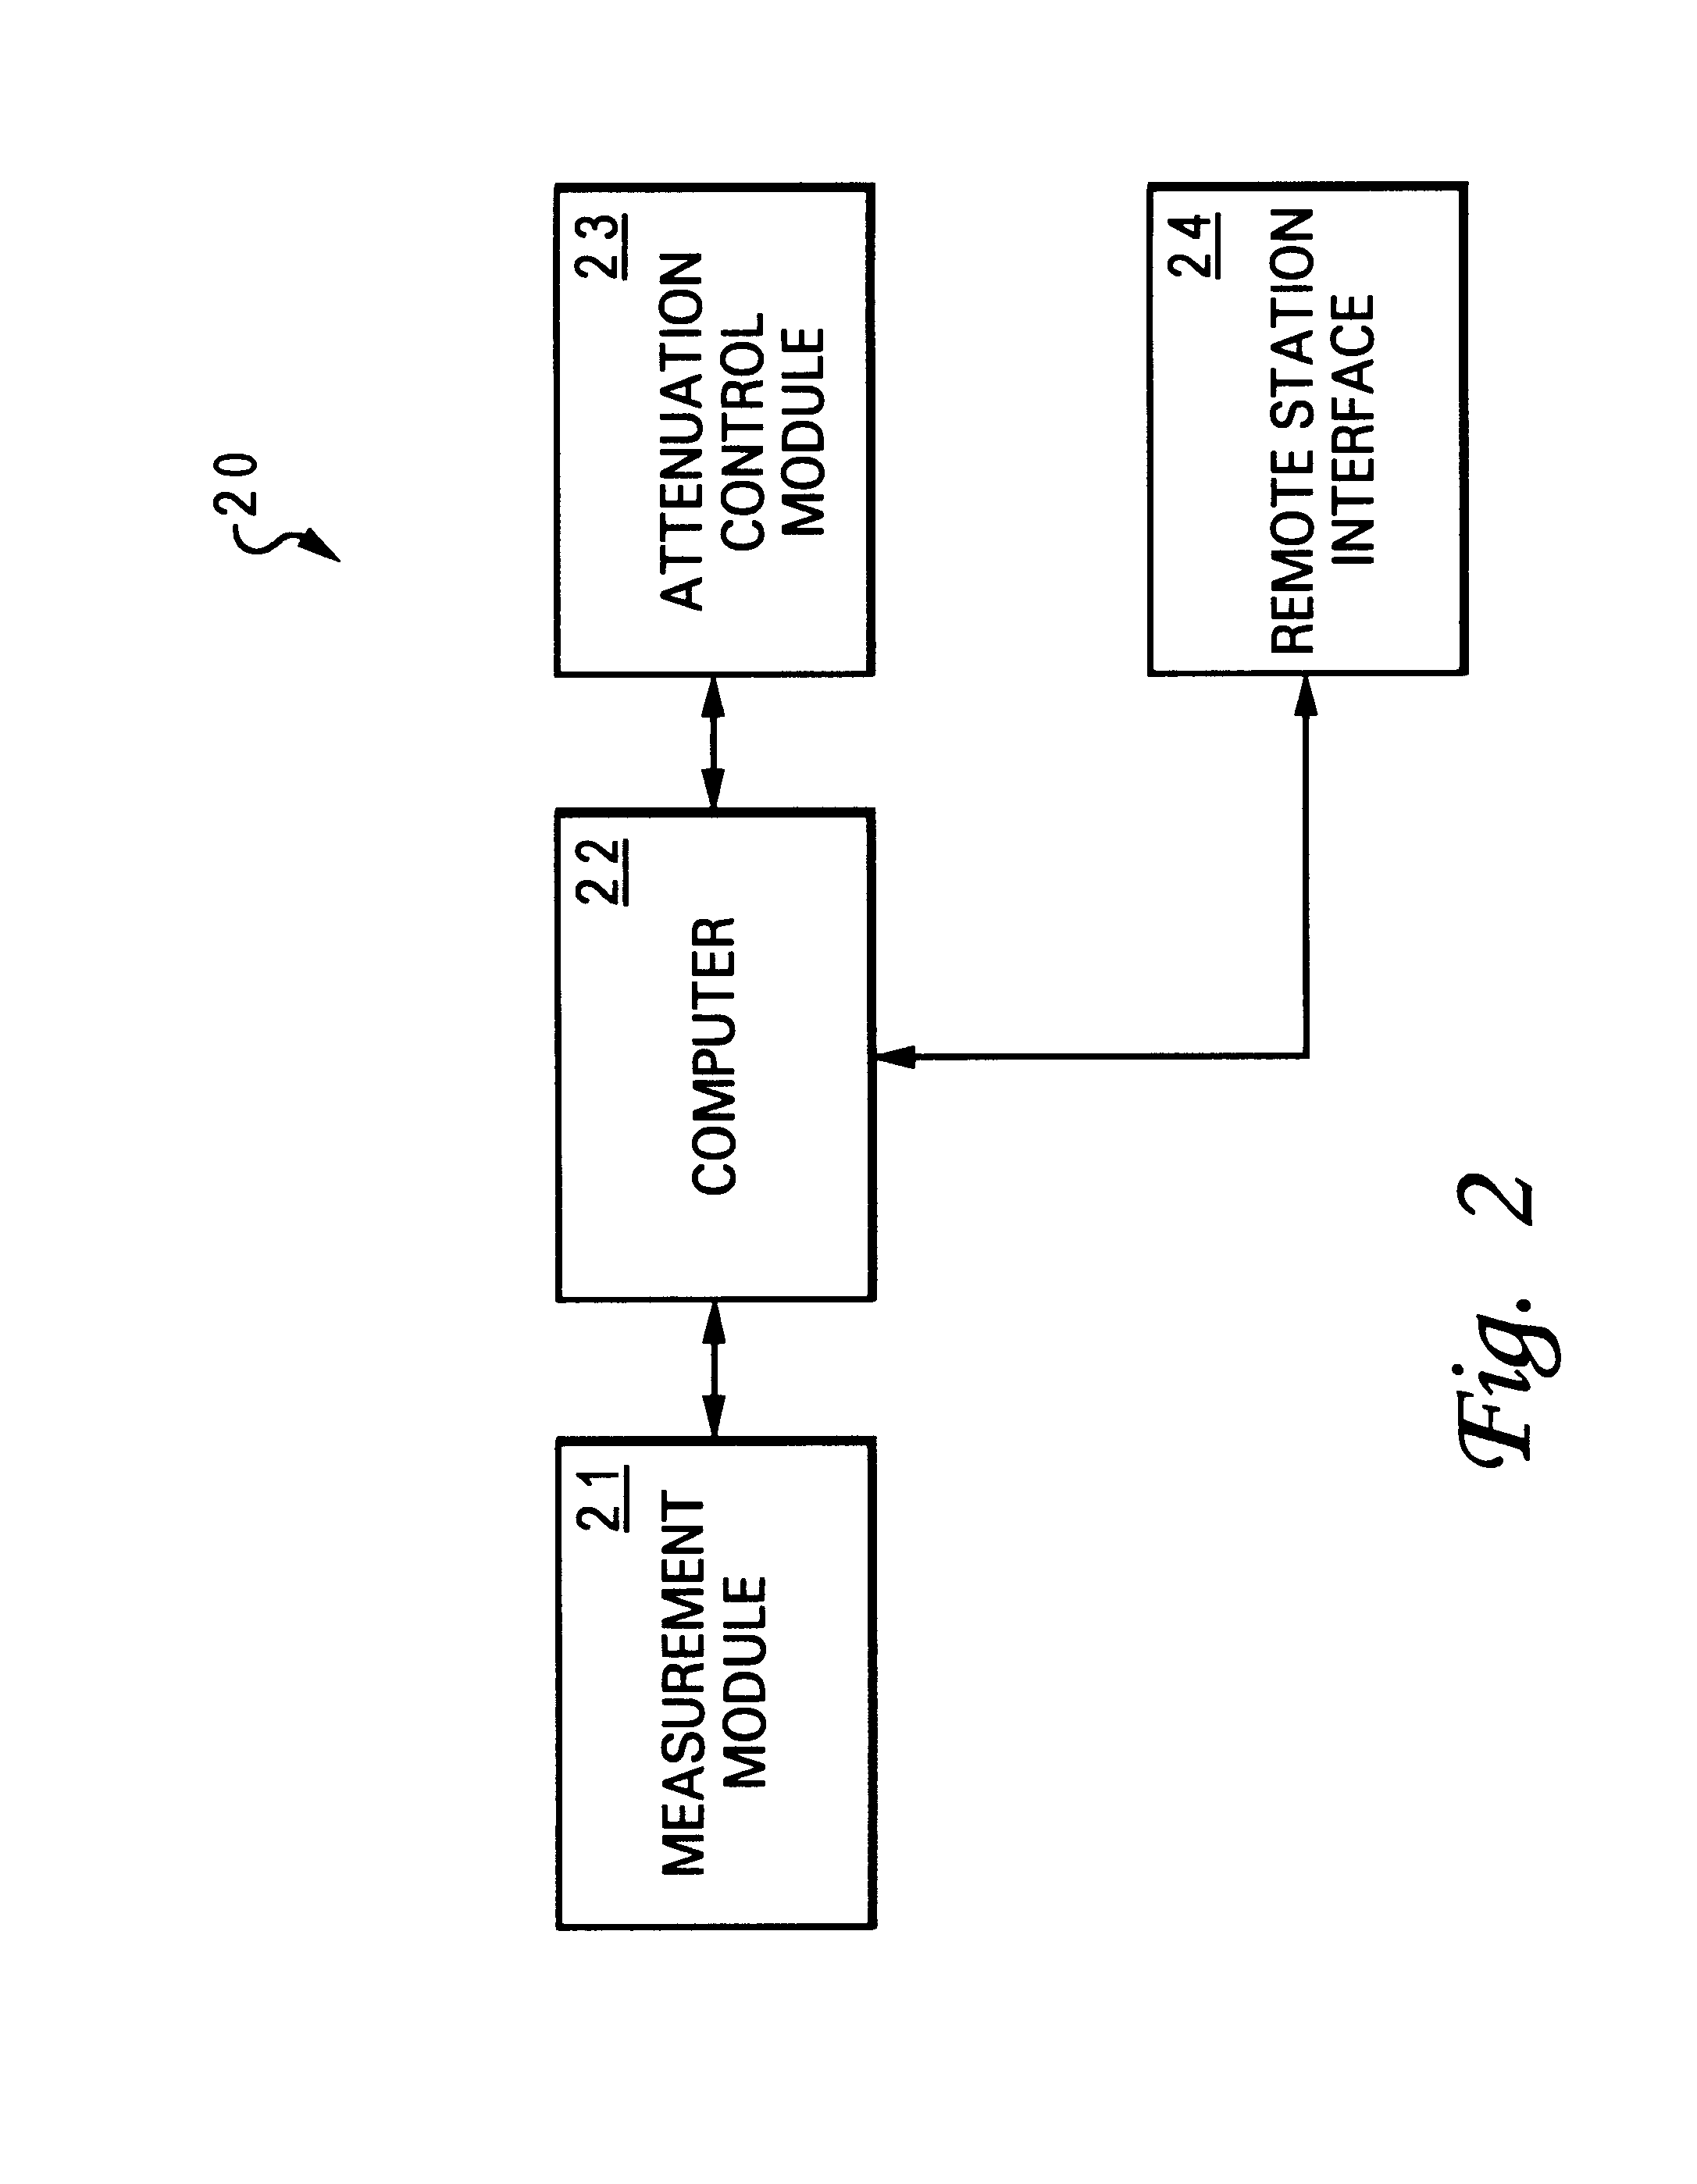 Method and apparatus for controlling uplink transmission power within a satellite communication system